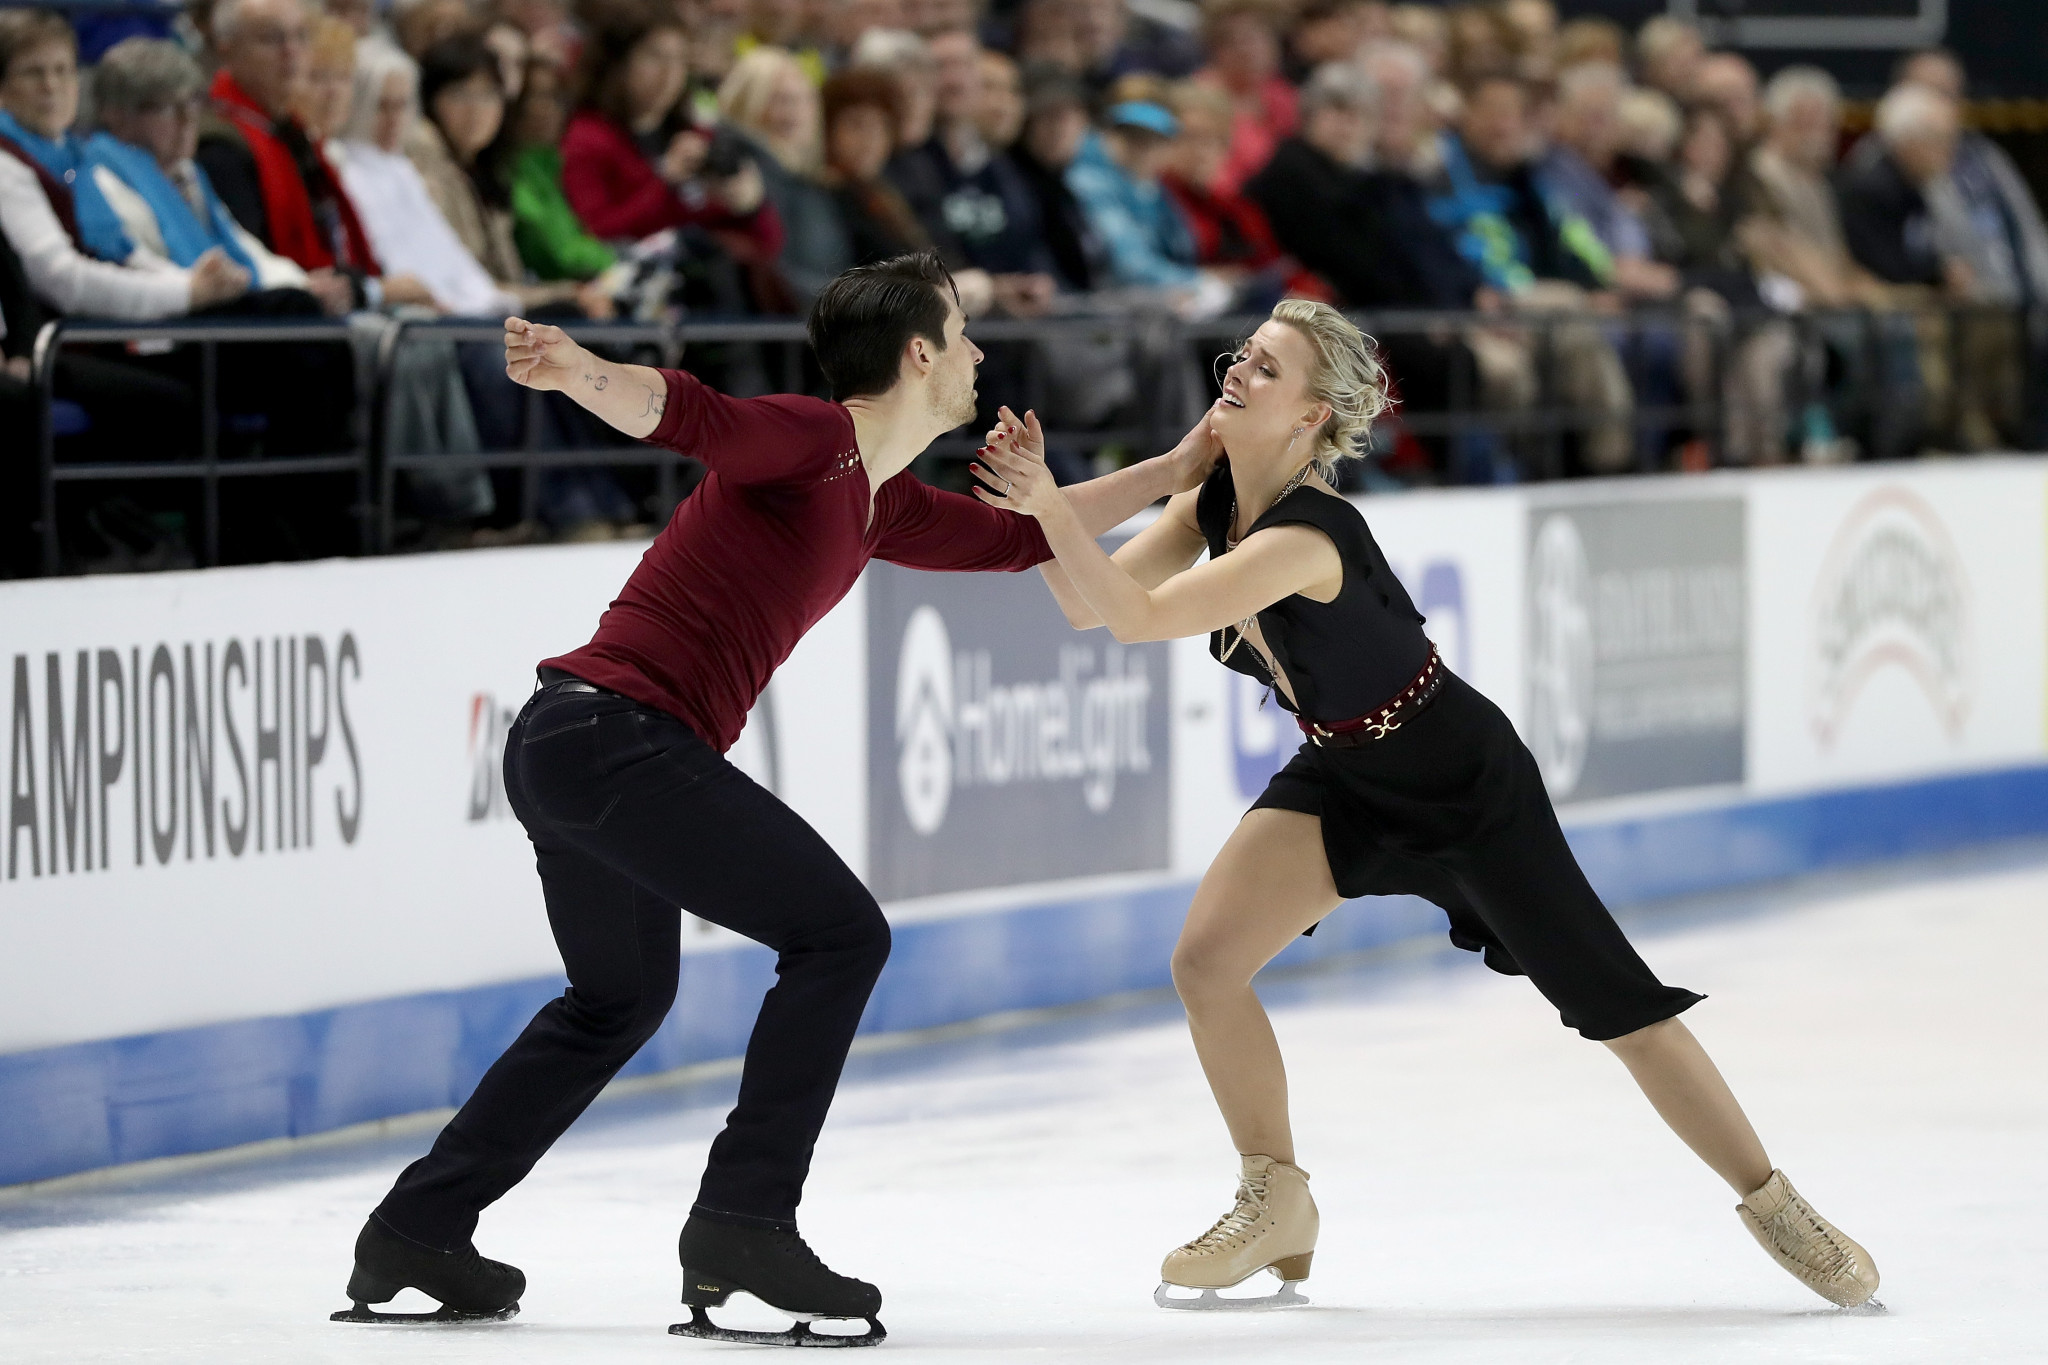 Zachary Donohue and Madison Hubbell are the clear favourites for the ice dance title at Skate America ©Getty Images